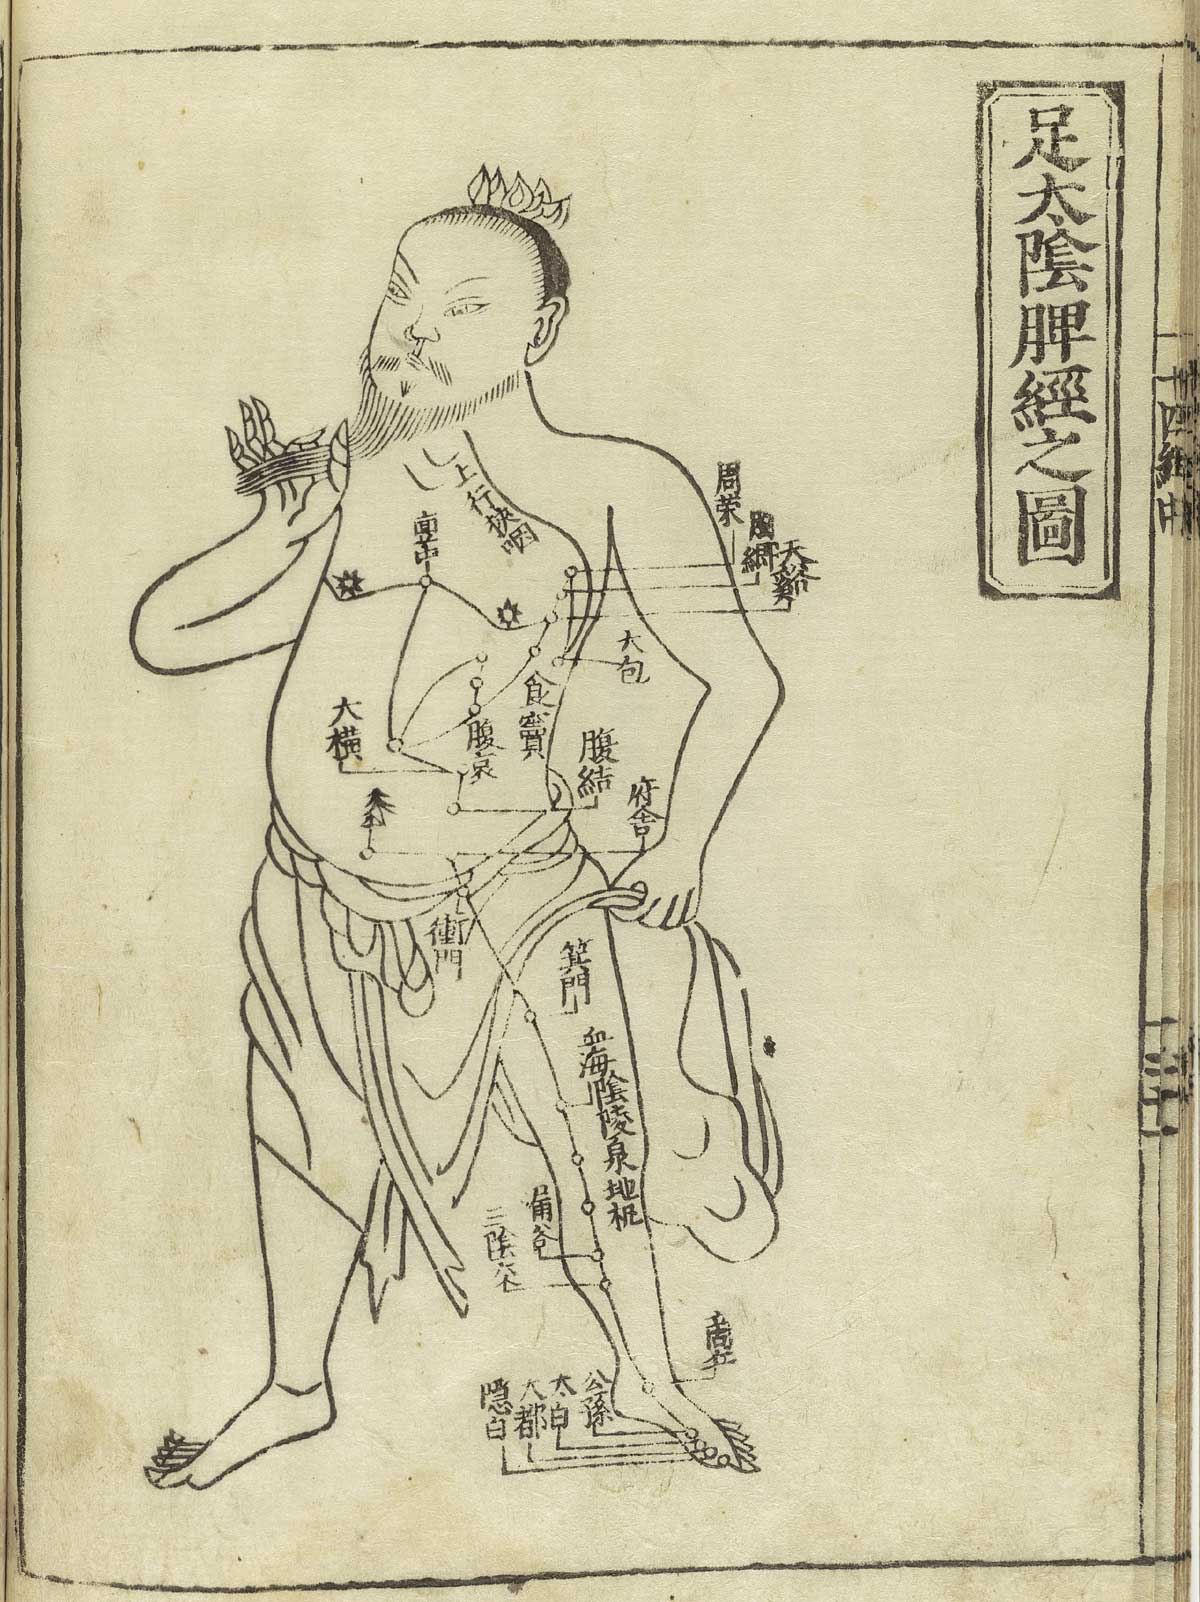 Woodcut showing the Jueyin liver meridian of foot of a standing male facing figure wearing a loin cloth with meridians indicated down the chest and leg with Chinese characters giving names of the points.